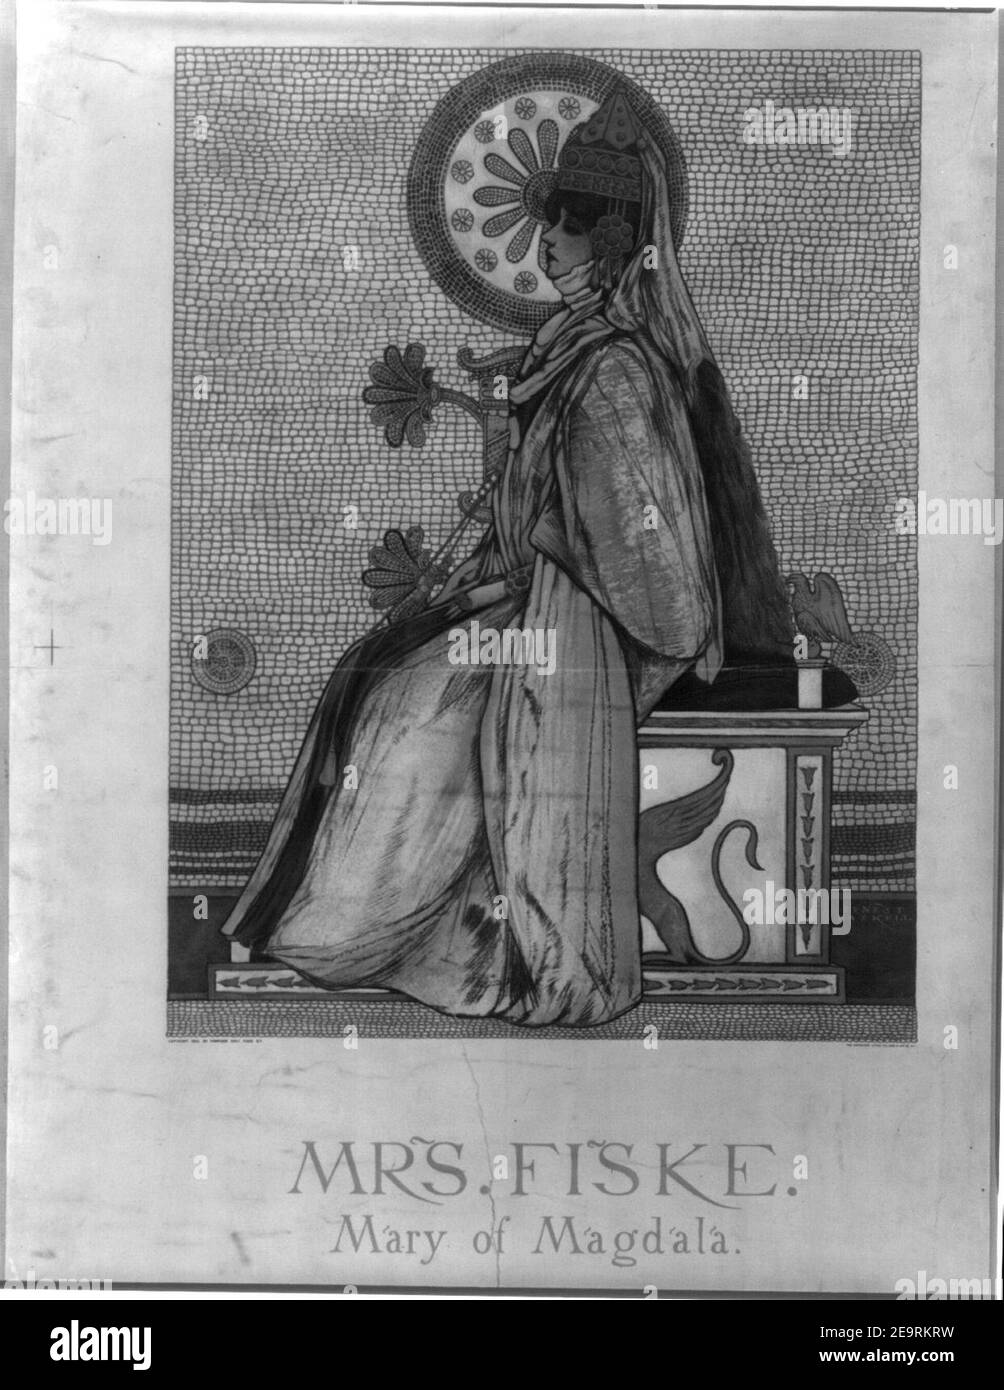 Mrs. Fiske - Mary of Magdala - Ernest Haskell. Stock Photo